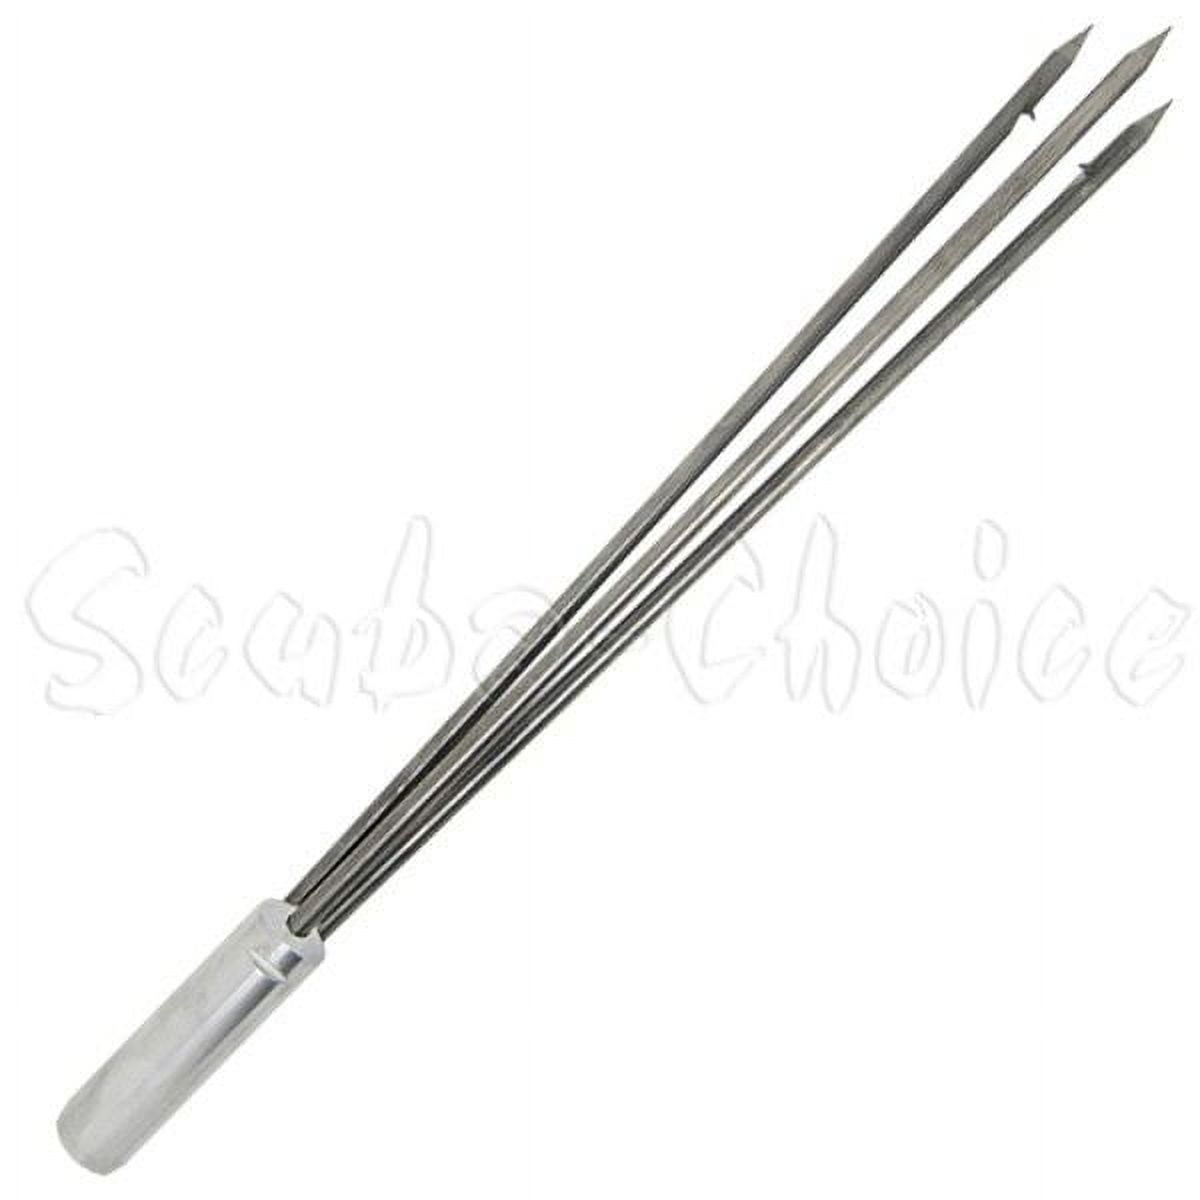 Spearfishing 12 Stainless Steel Pole Spear Tip 3 Prong Head Paralyzer 